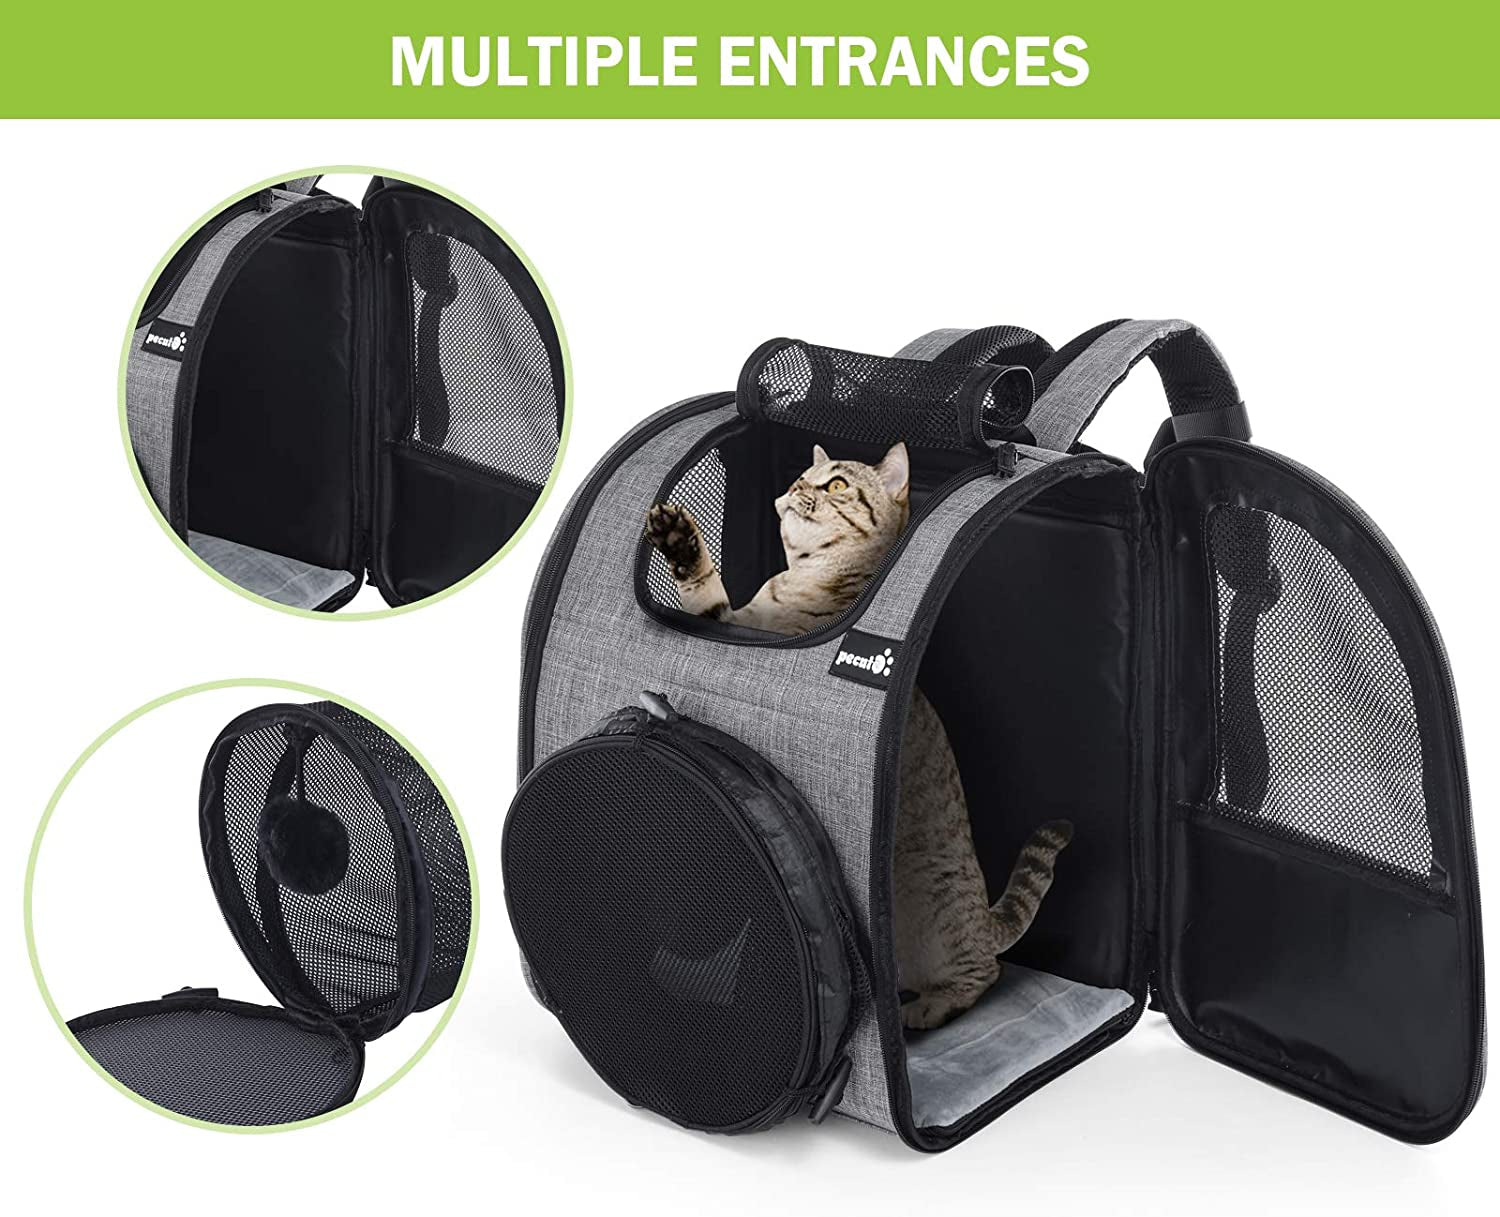 Pet Carrier Backpack with Tunnel, Dog Carrier Backpack Expandable Tunnel and Breathable Mesh for Cats Puppies, Pet Backpack Bag for Hiking Travel Camping Outdoor Hold Pets up to 18 Lbs